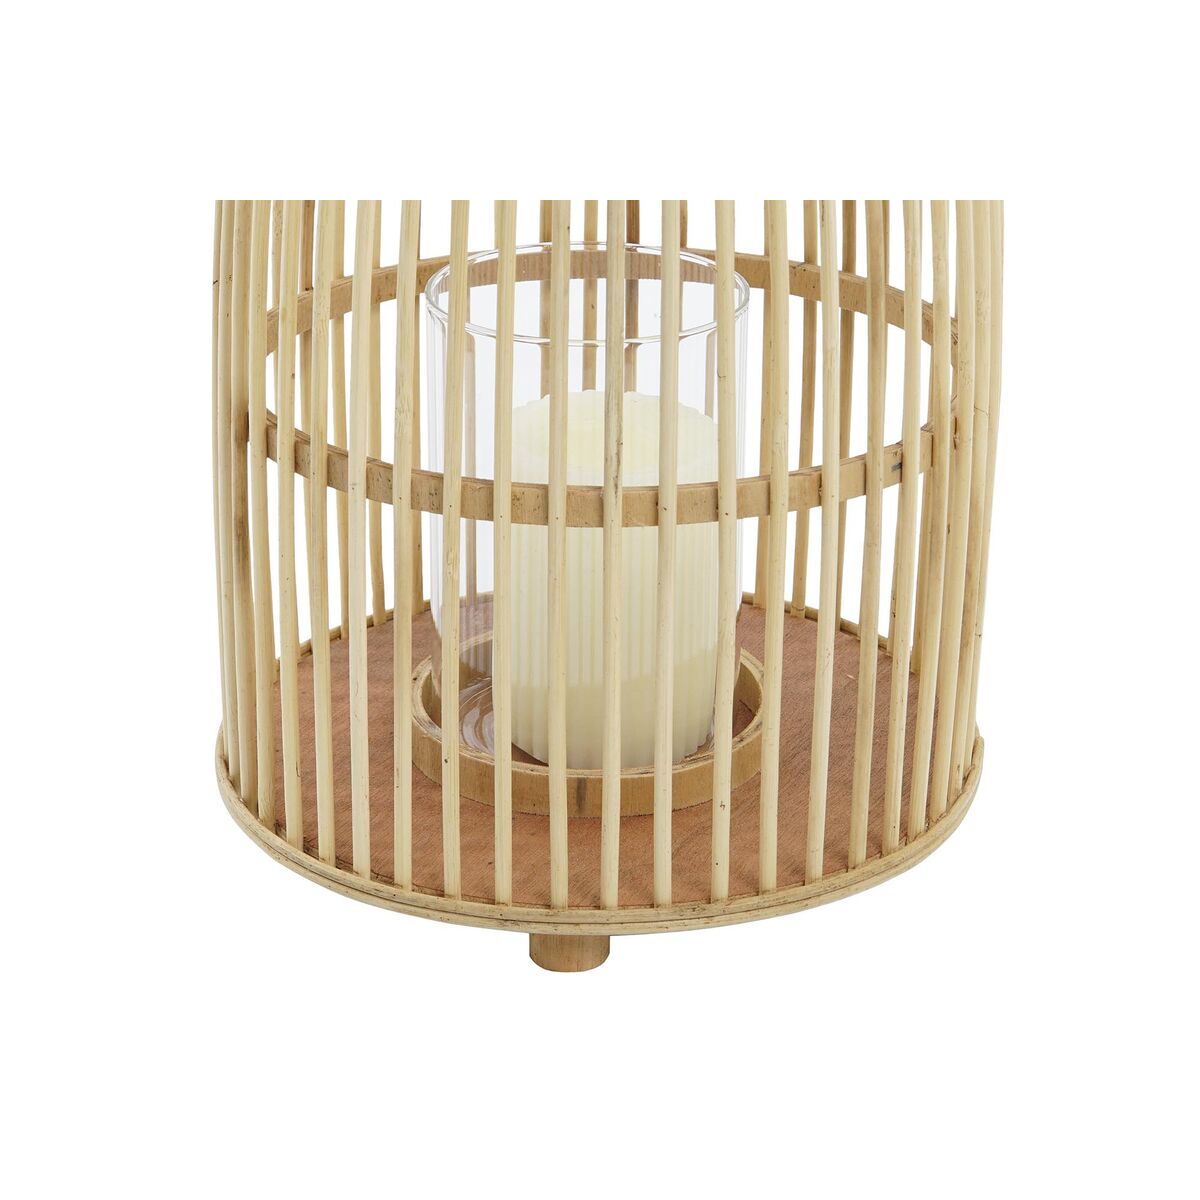 DKD Home Decor Glass Bamboo Candle Holder (25 x 25 x 56 cm)